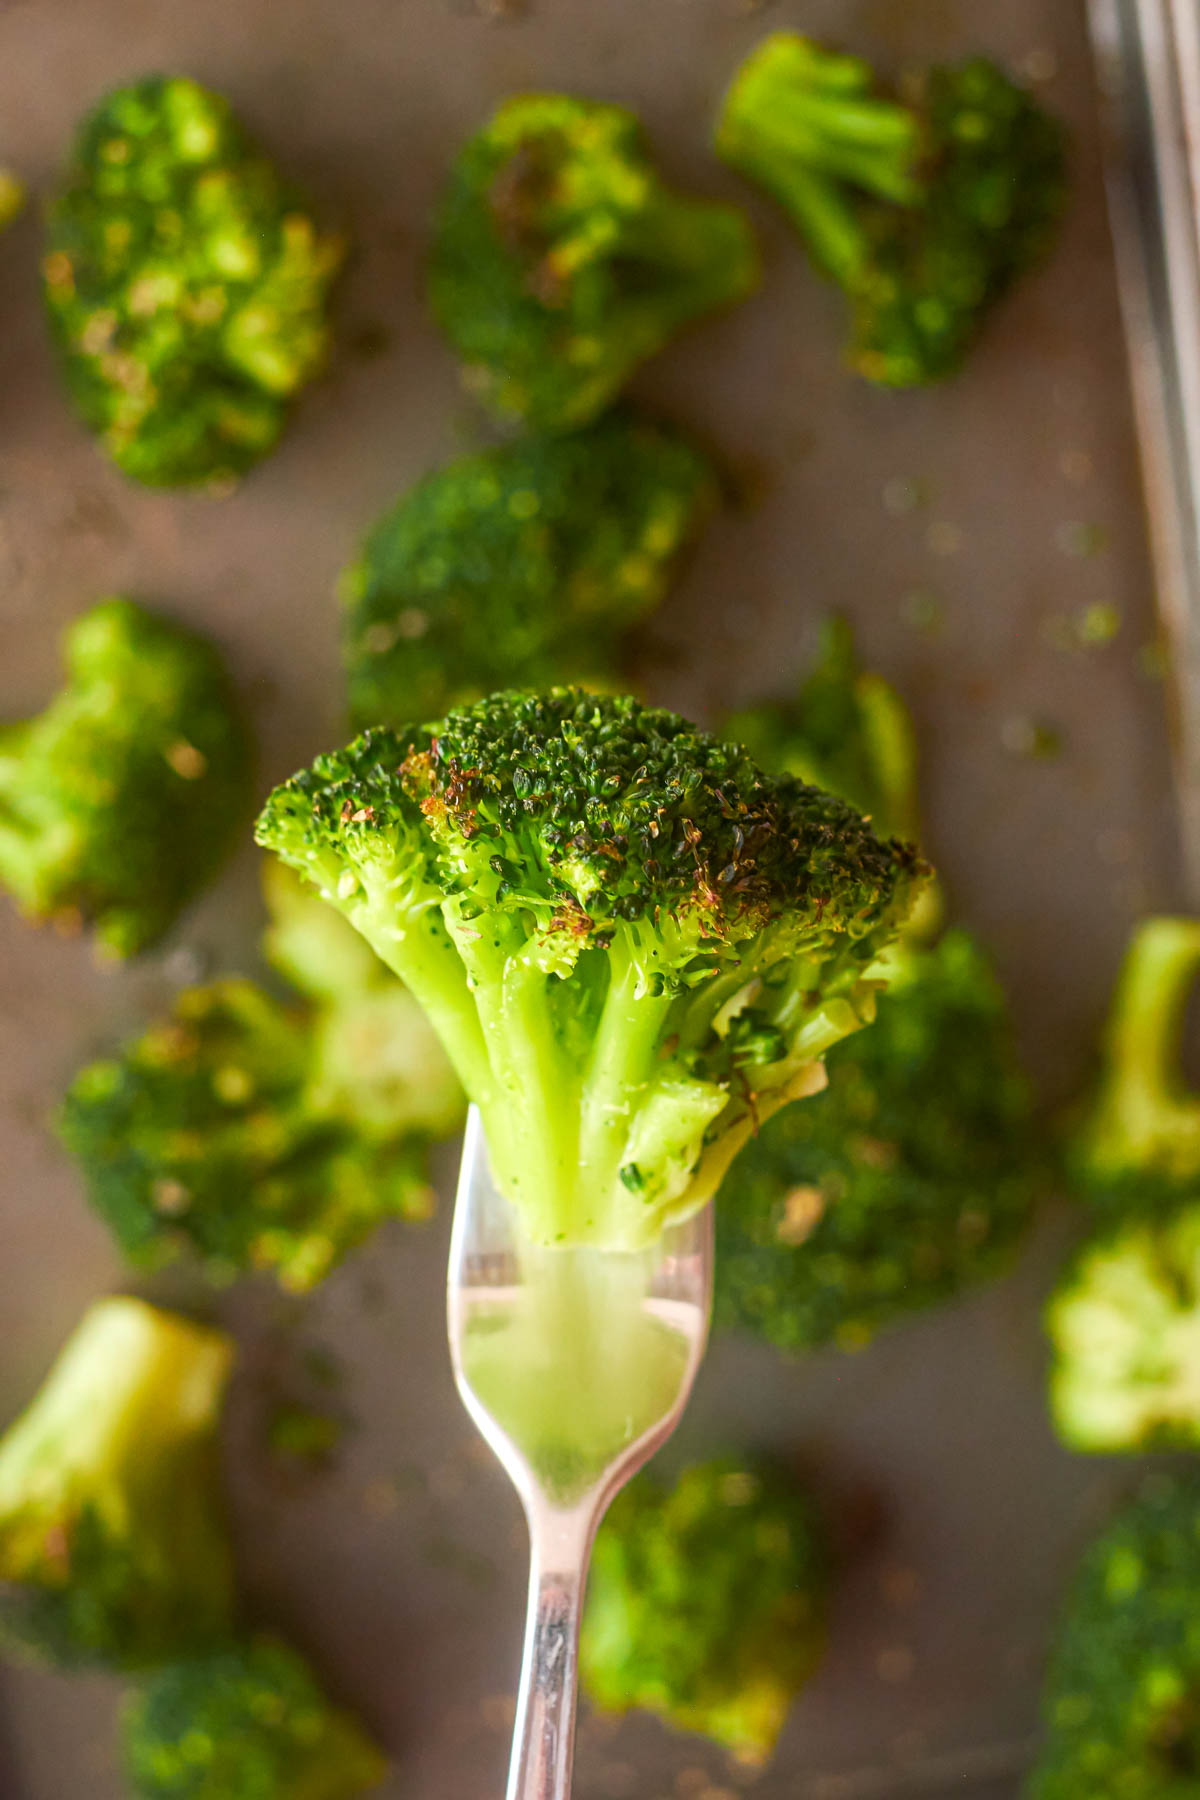 close up view of a floret being removed from a tray of roasted frozen broccoli